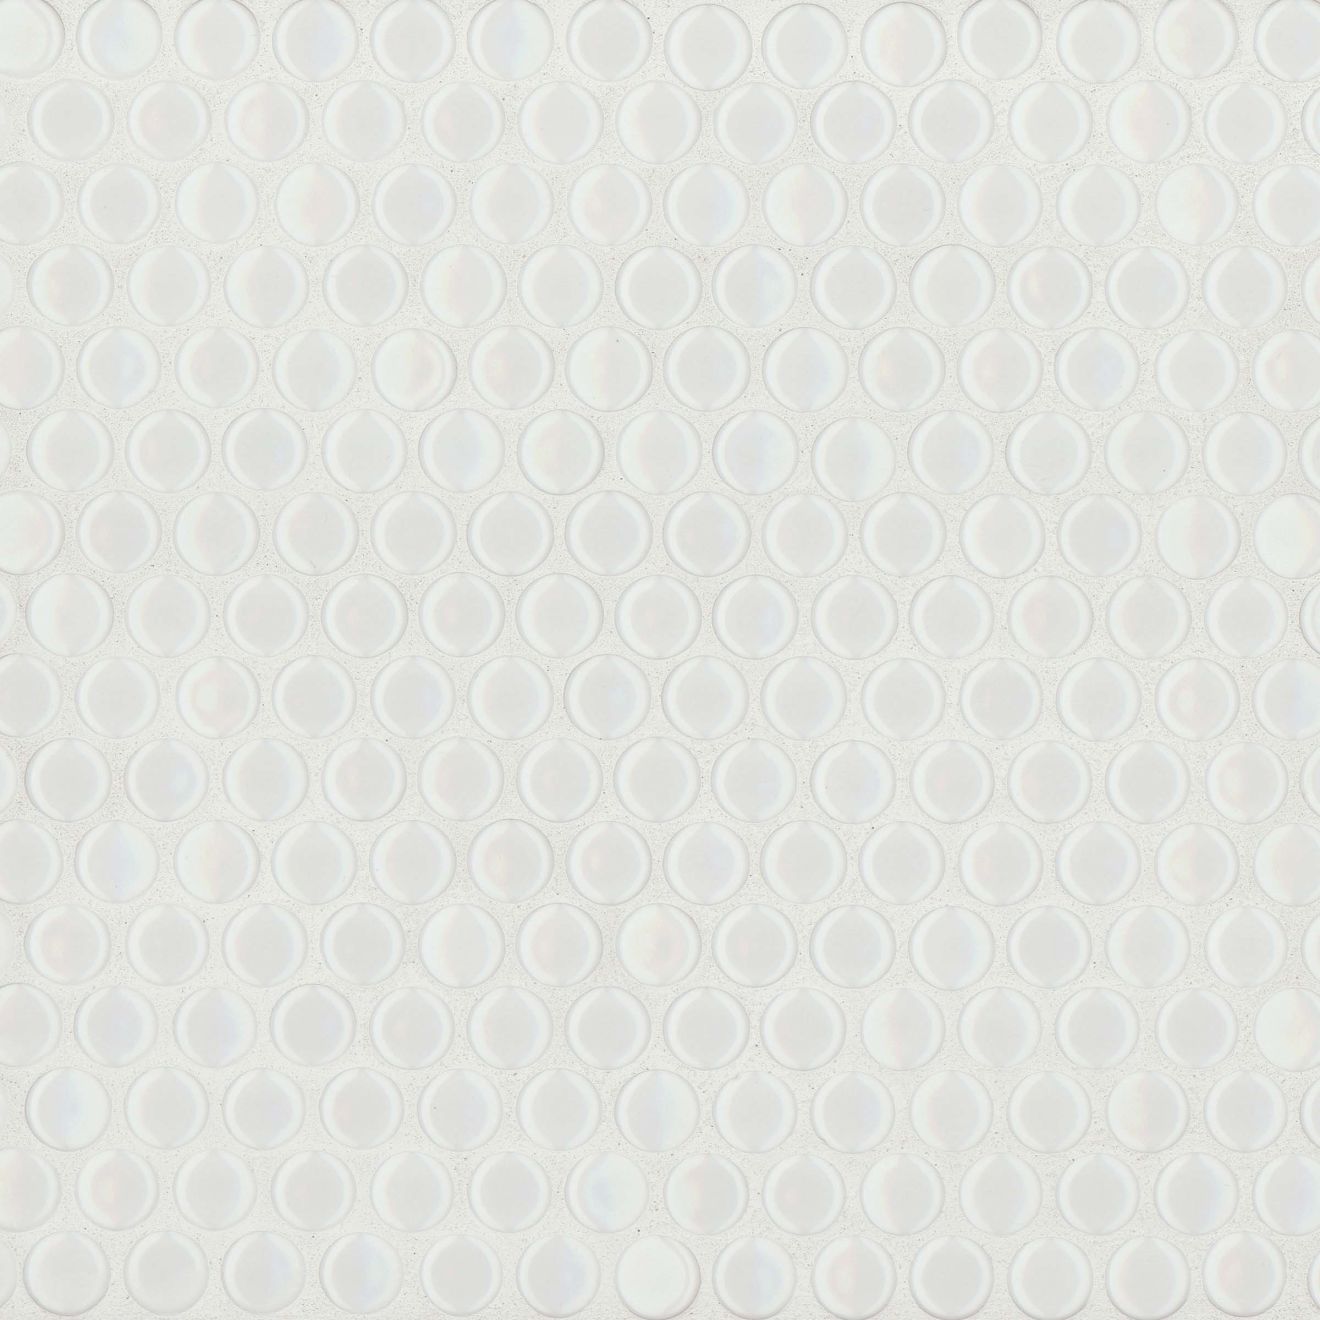 Matte white penny shaped mosaic tile on a beige background.